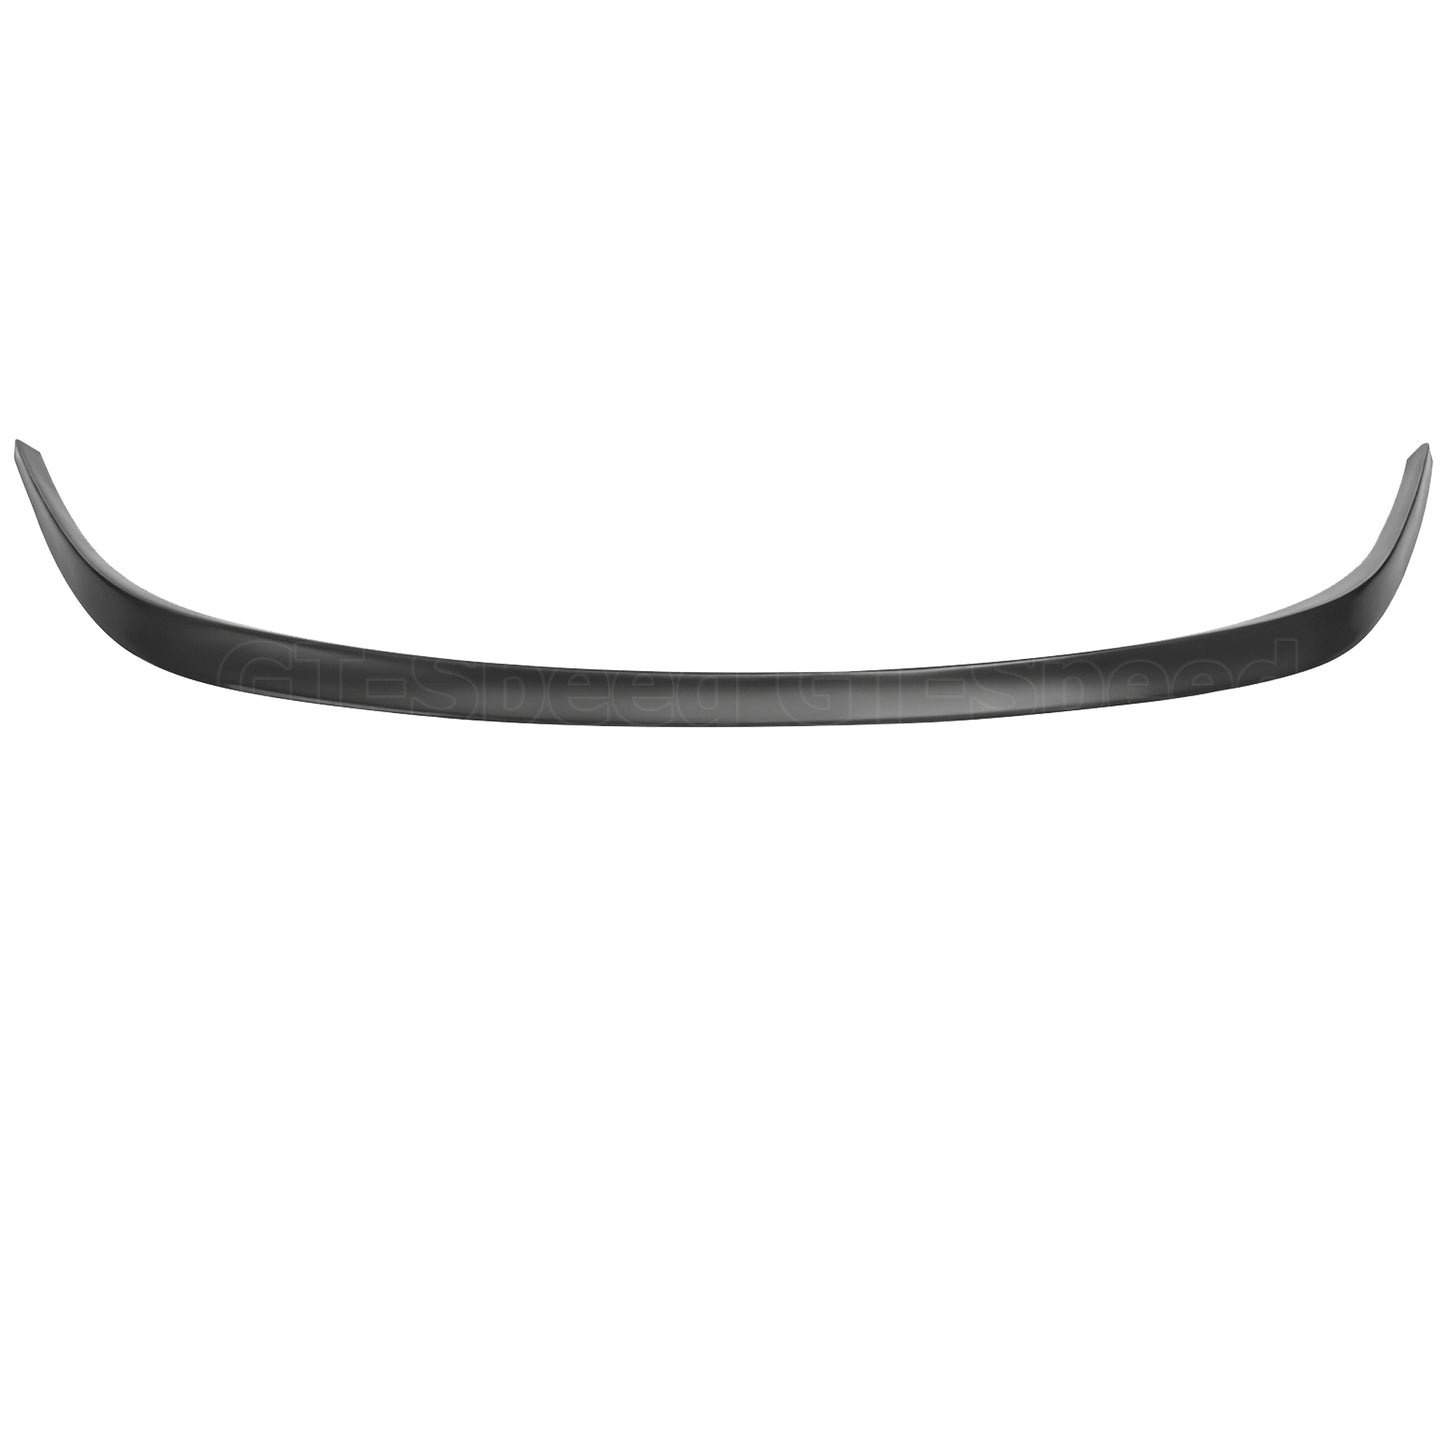 [GT-Speed] OE Style PU Front Bumper Lip, Compatible With 1999-2004 Ford Mustang Base GT Factory Bumper Only